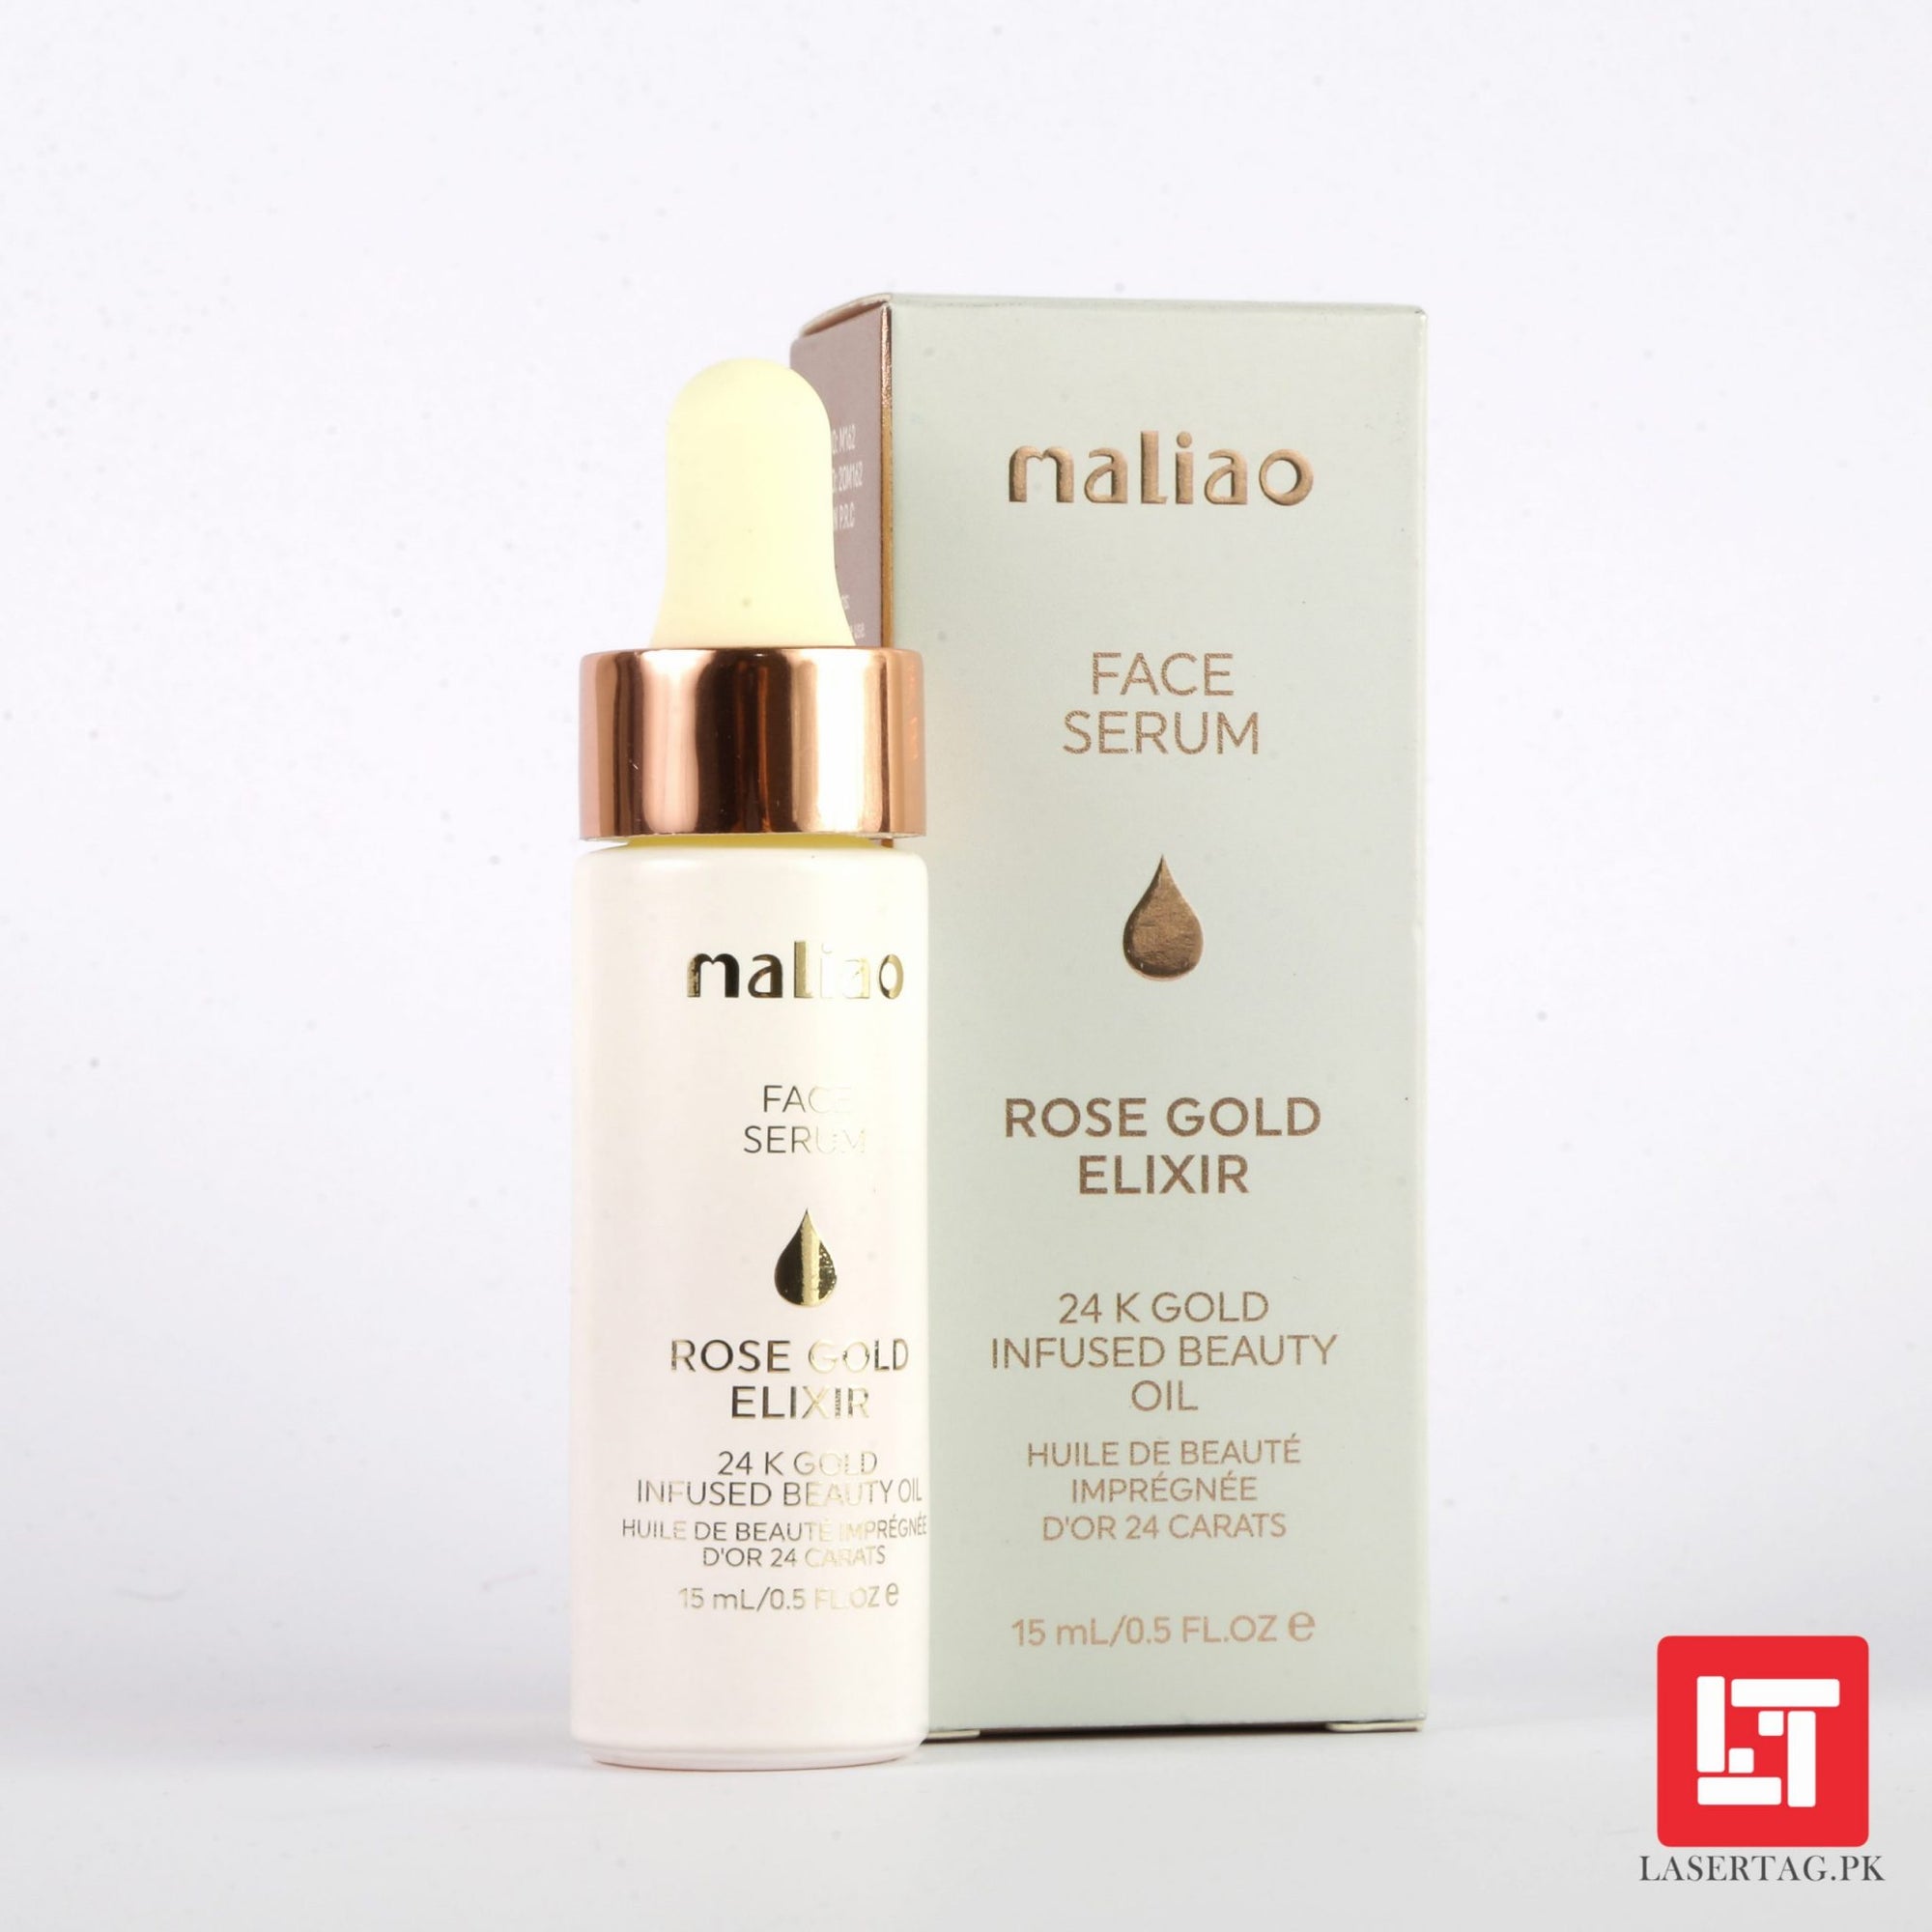 Maliao Face Serum Rose Gold Elixir 24K Gold Infused Beauty Oil M162 15ml freeshipping - lasertag.pk